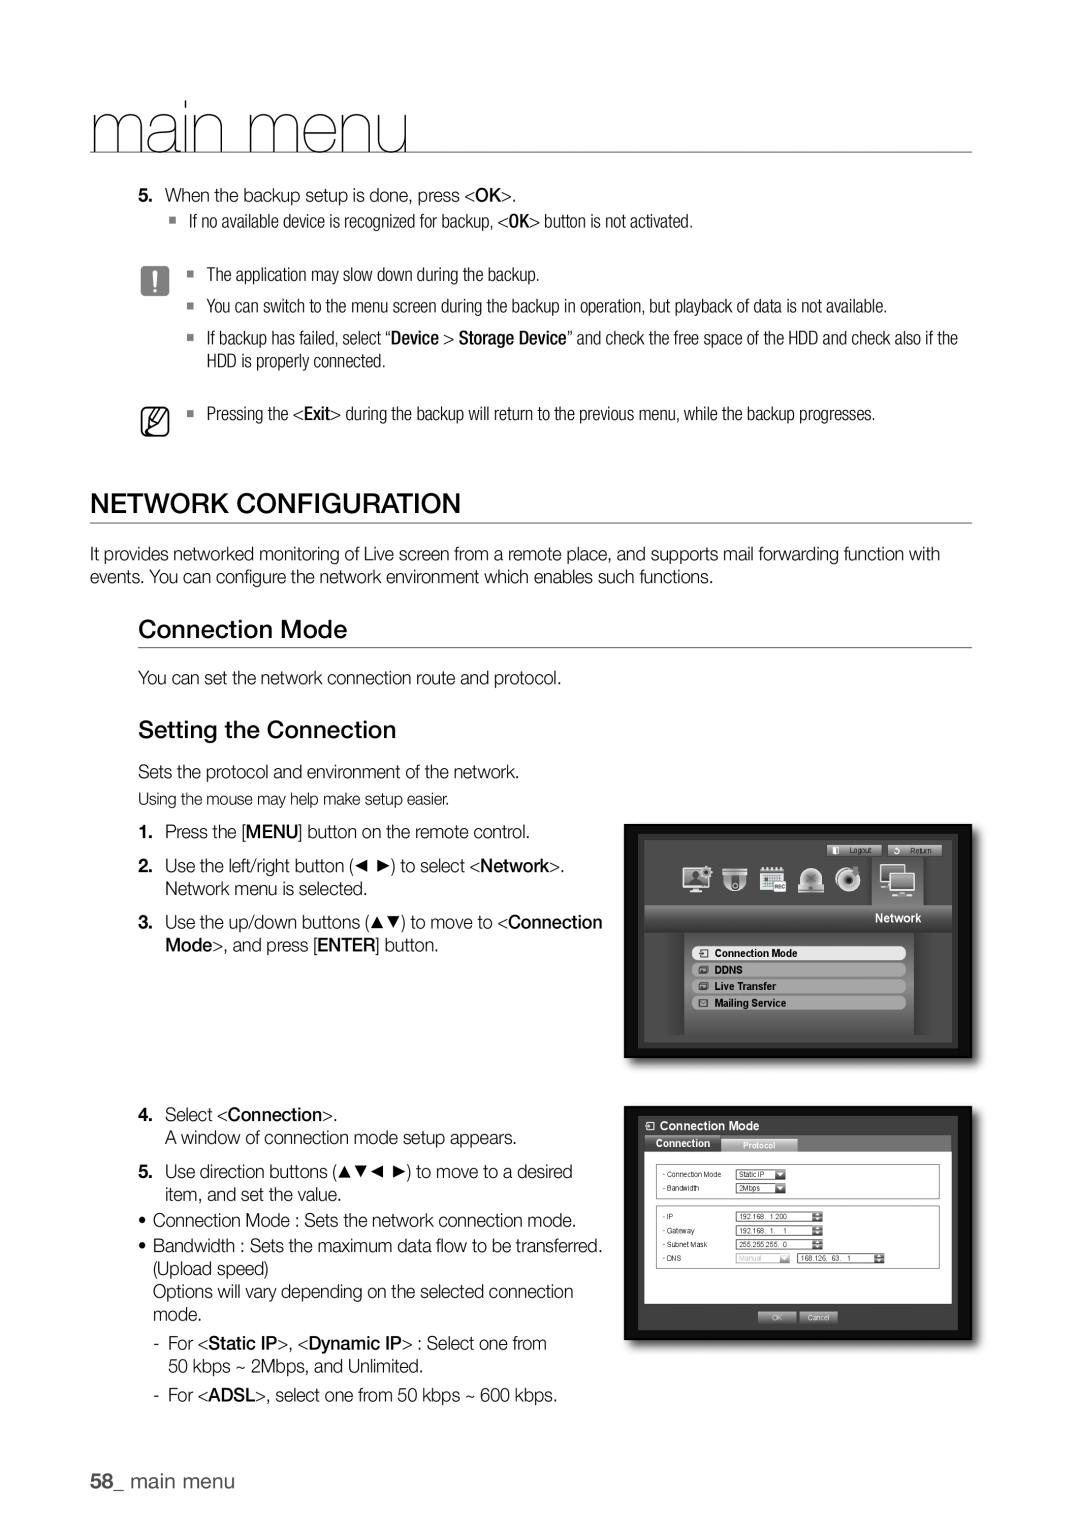 Samsung SDR3100 user manual neTWORK COnFiGuRaTiOn, Connection mode, Setting the Connection, 58_ main menu 